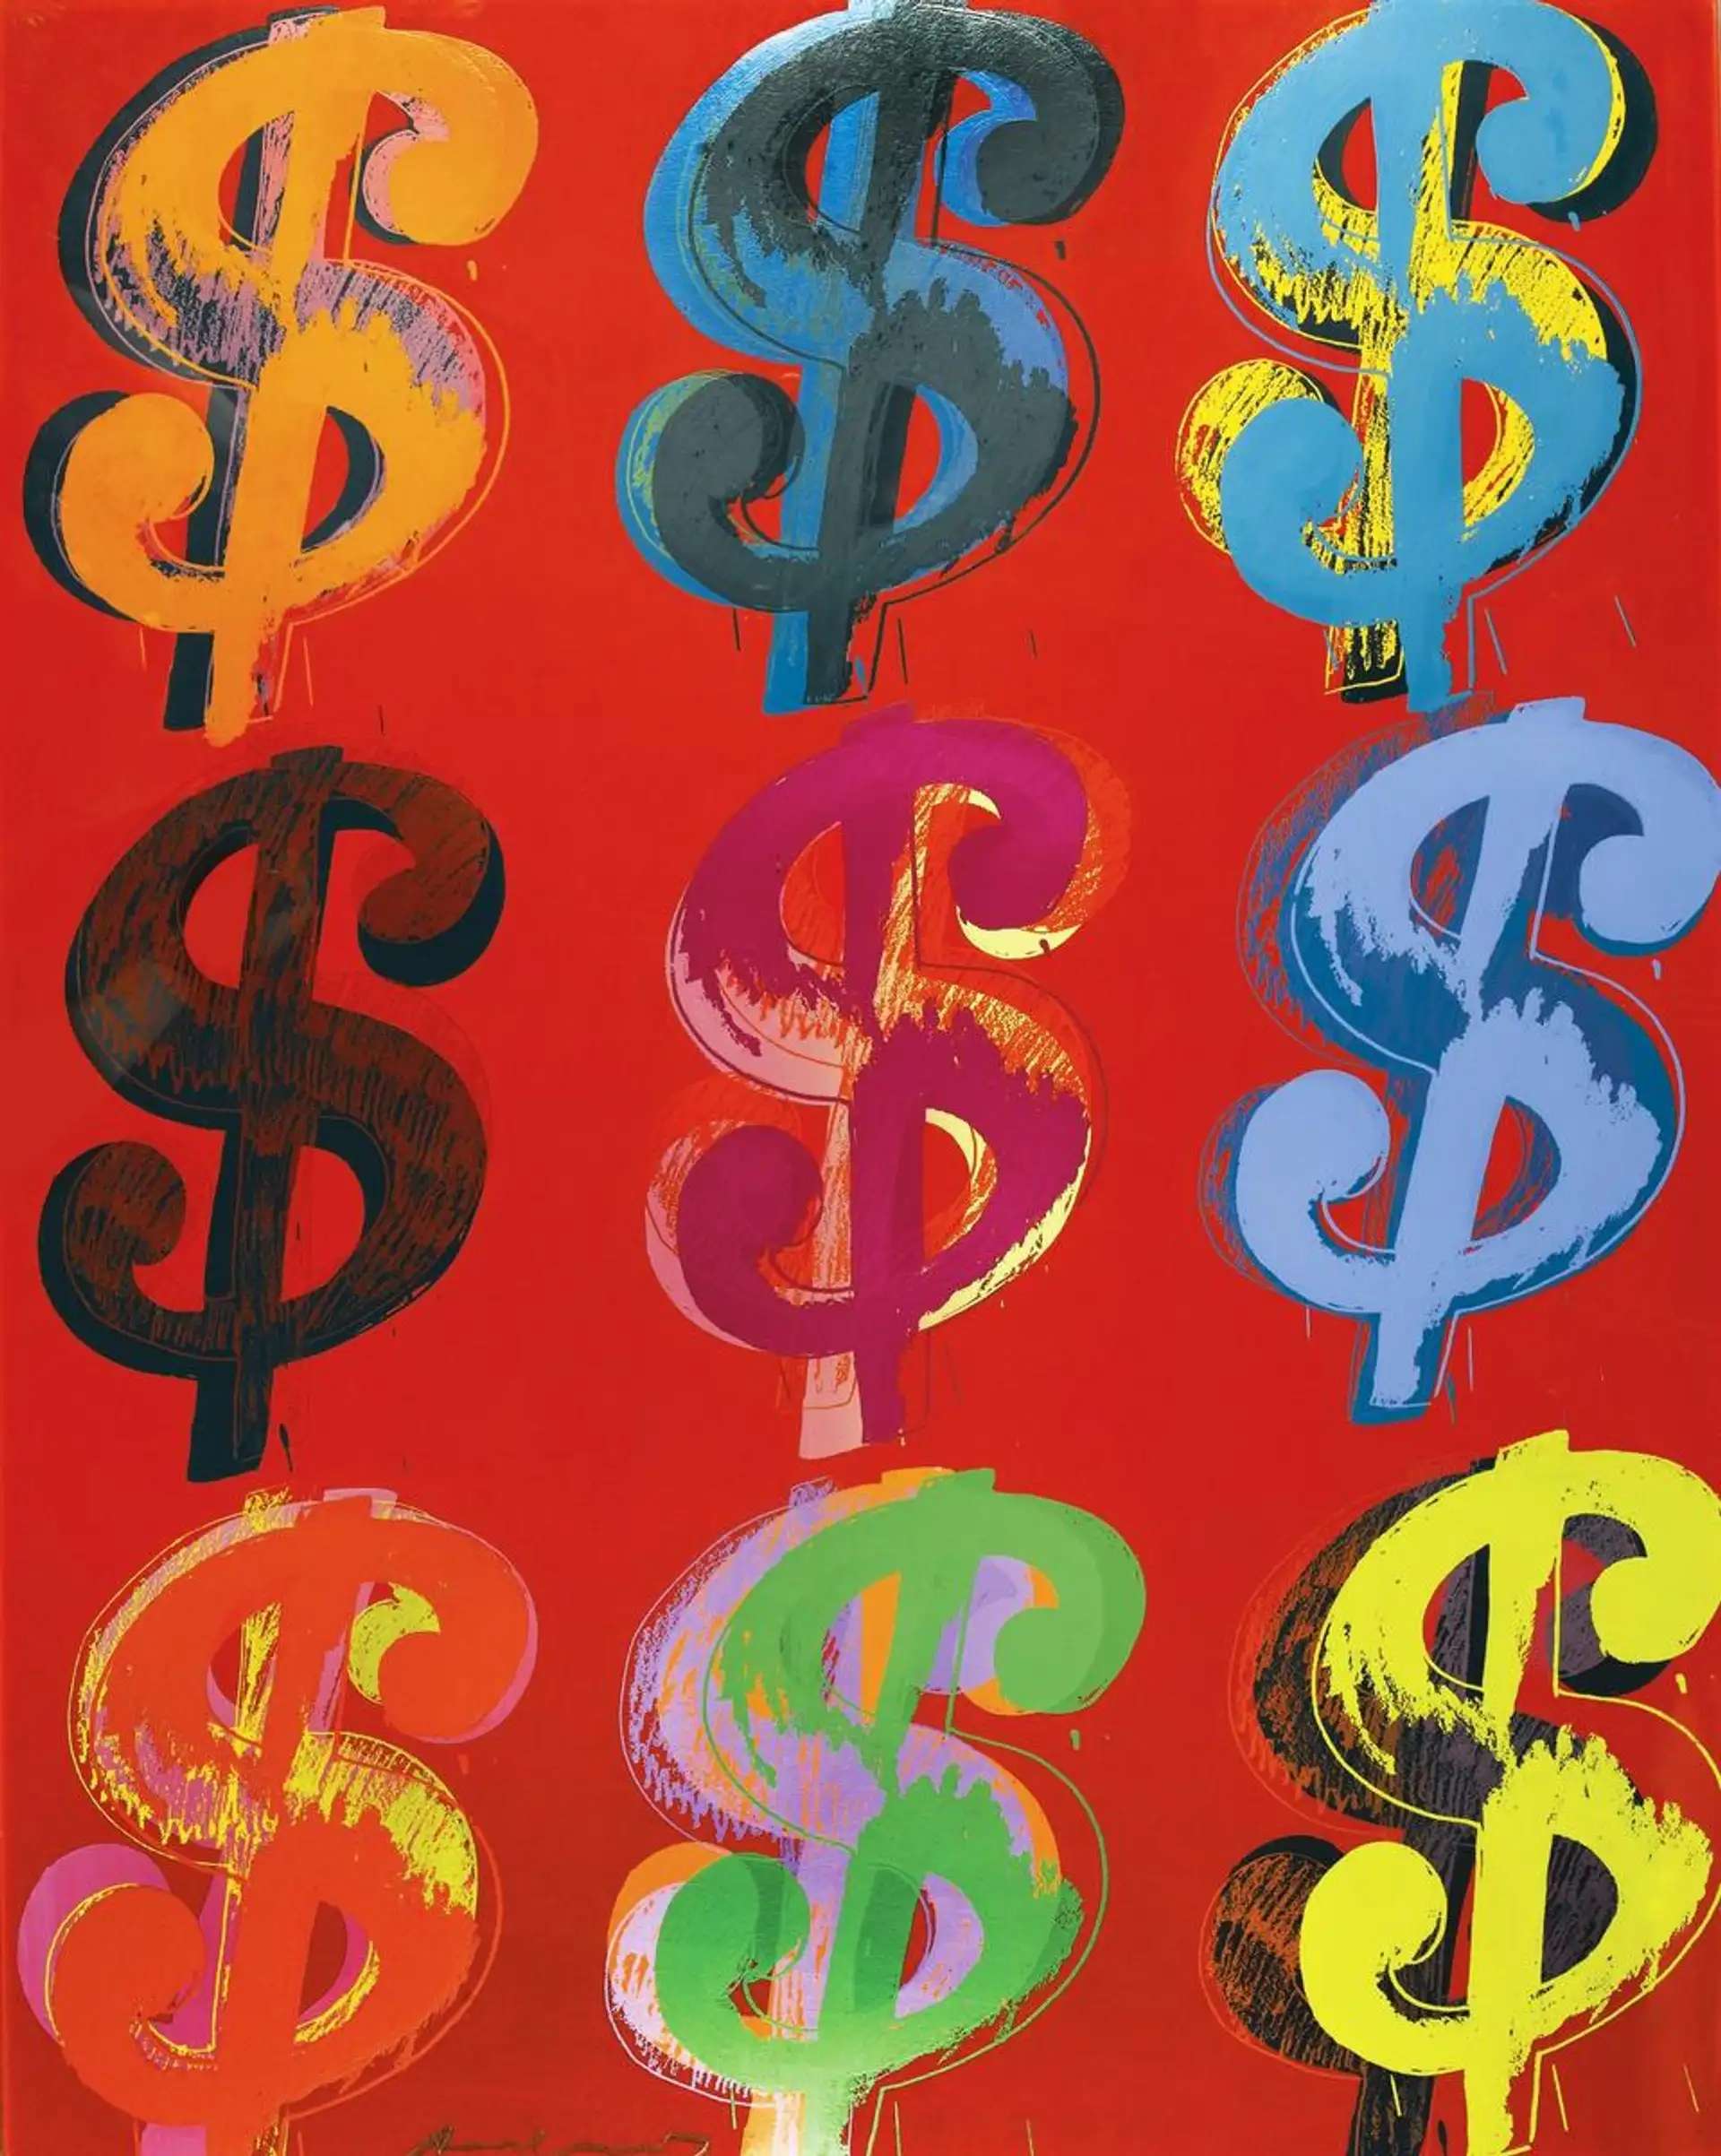 10 Facts About Andy Warhol's Dollar Sign